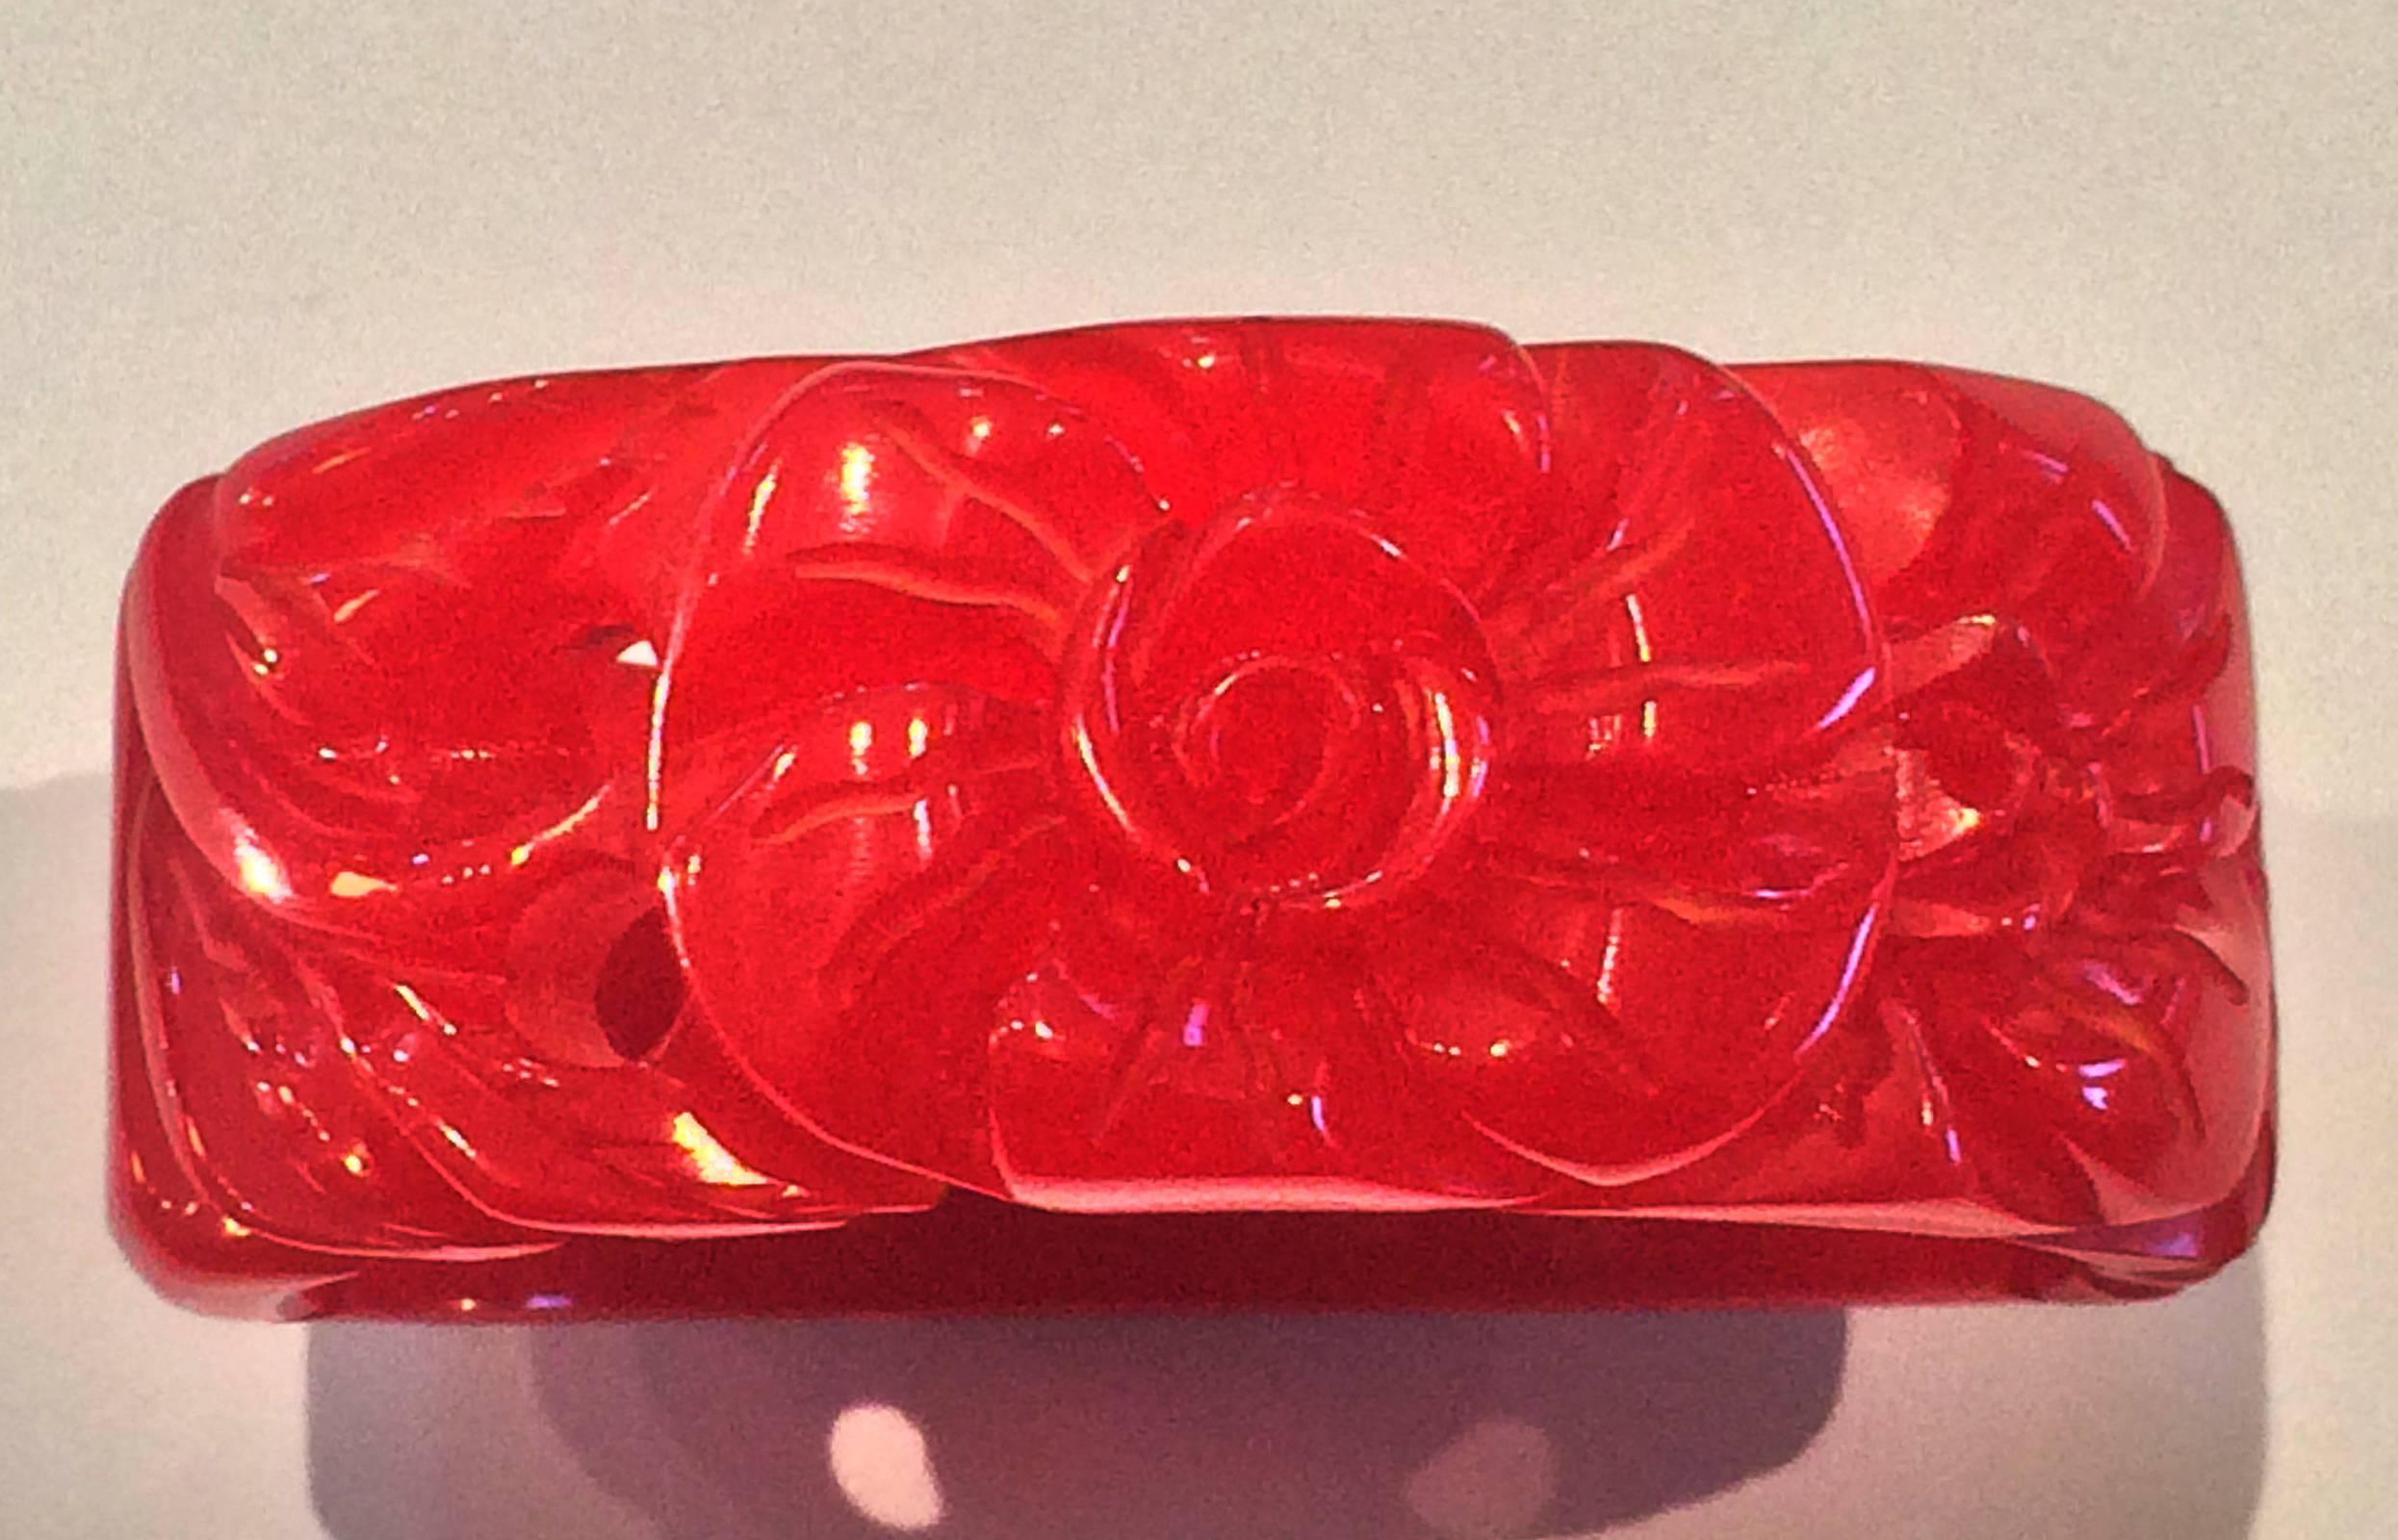 A fabulous almost translucent Art Deco hinged bracelet or clamper. Deeply Carved Cherry Red Bakelite of a rose on the front.. Immaculate condition with hinge clasp in perfect working order and no damage or repirs. Dimensions are approx.. : Interior